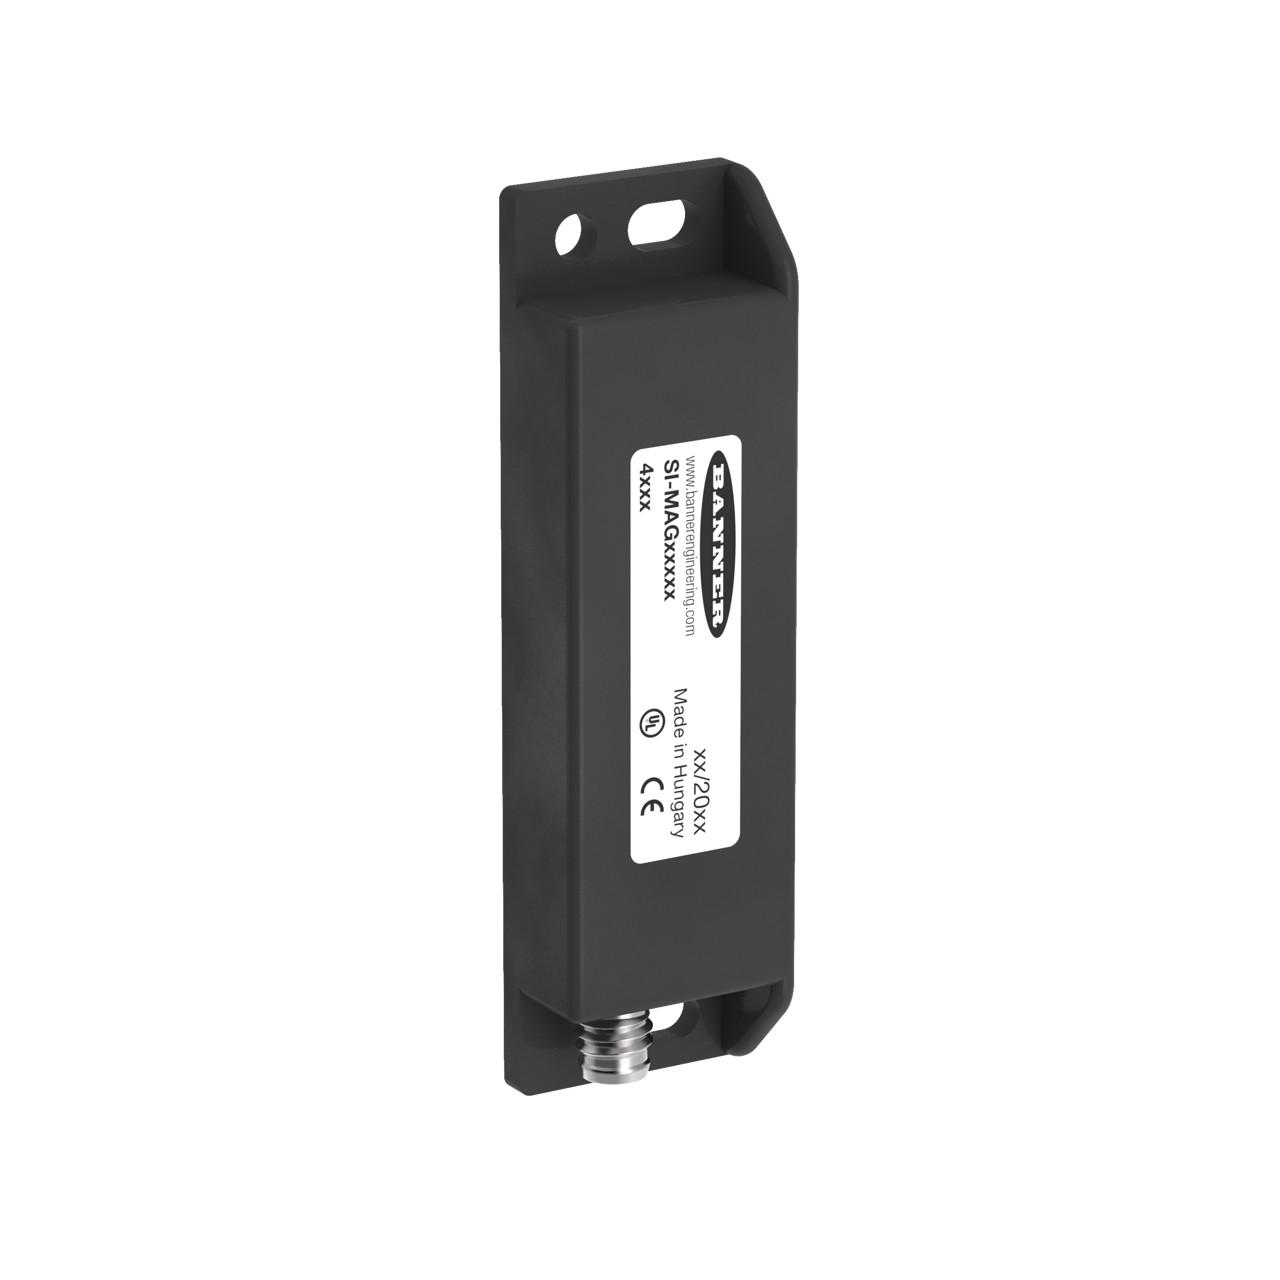 Banner SI-MAGB1SMQD Magnetic Switch: Rectangular Sensor, Repeat Switching Accuracy: +/- 0.1 mm, Dimensions: 88 x 25 mm; 4-pin M8 Integral Pico-Style QD, Used With Model: SI-MAGB1MM